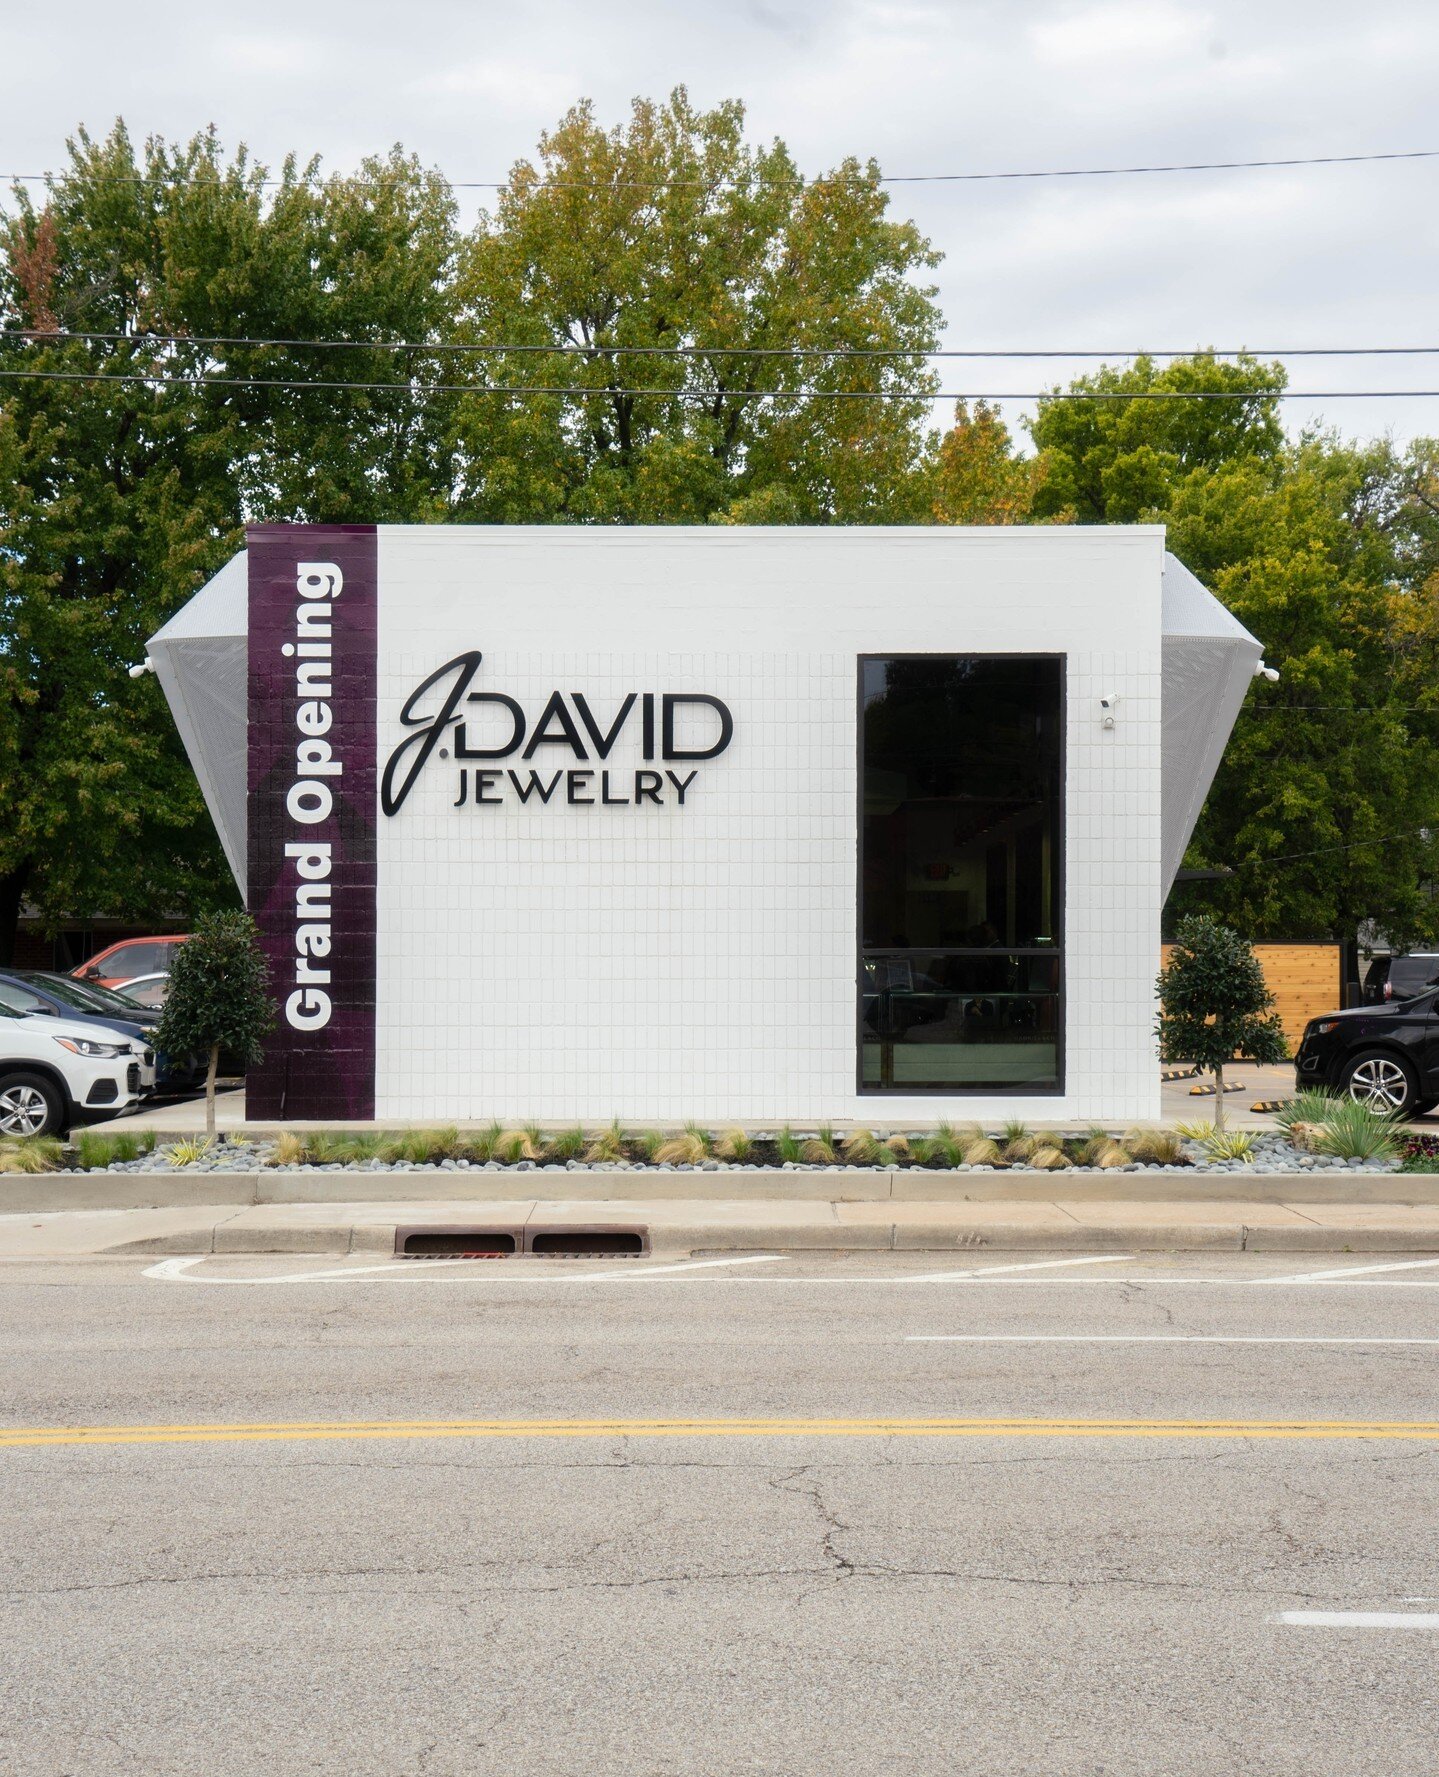 GRAND OPENING // J. David Jewelry⁠
⁠
It&rsquo;s always great to see a project completed, and it is extra special to visit the space all dressed up for a party! Thank you to Joel &amp; Kendra, and their wonderful team &ndash; enjoy your new location i